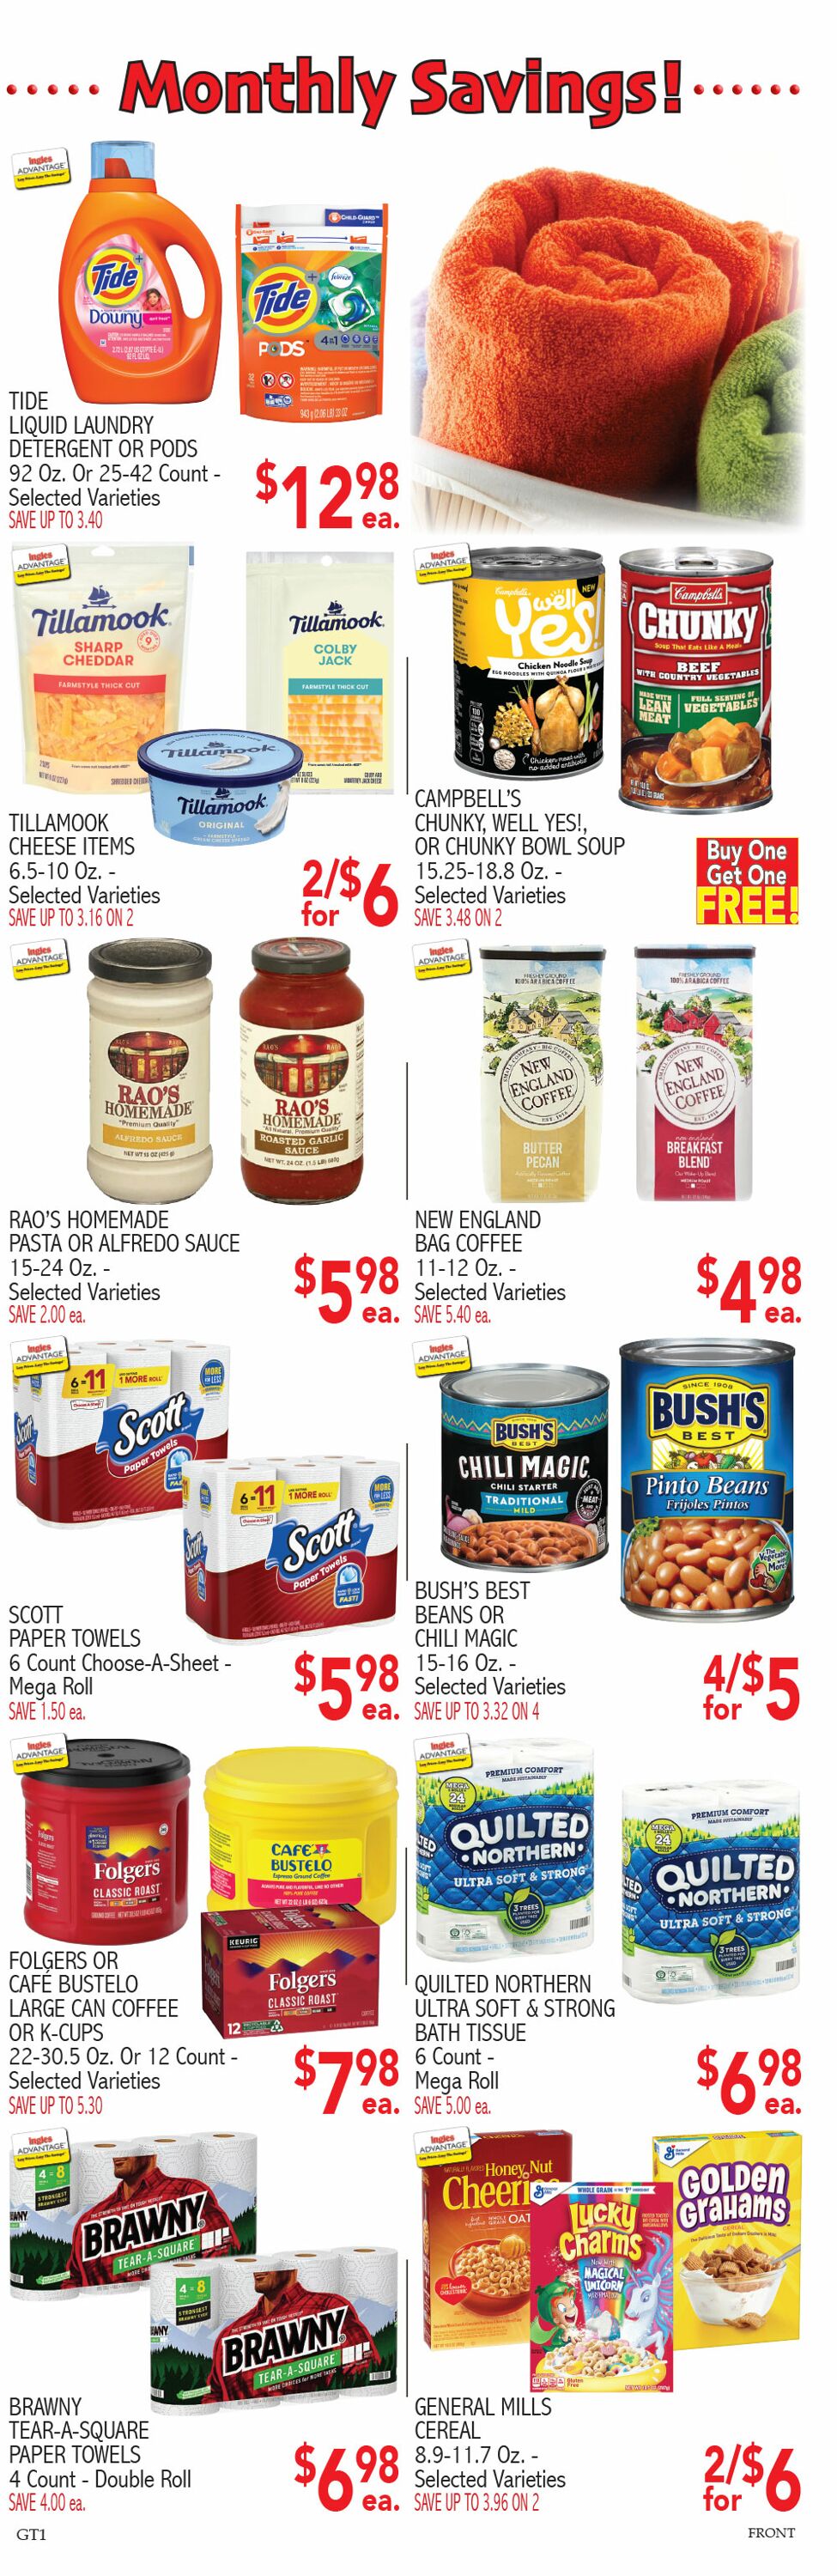 Ingles Ad from 10/12/2022